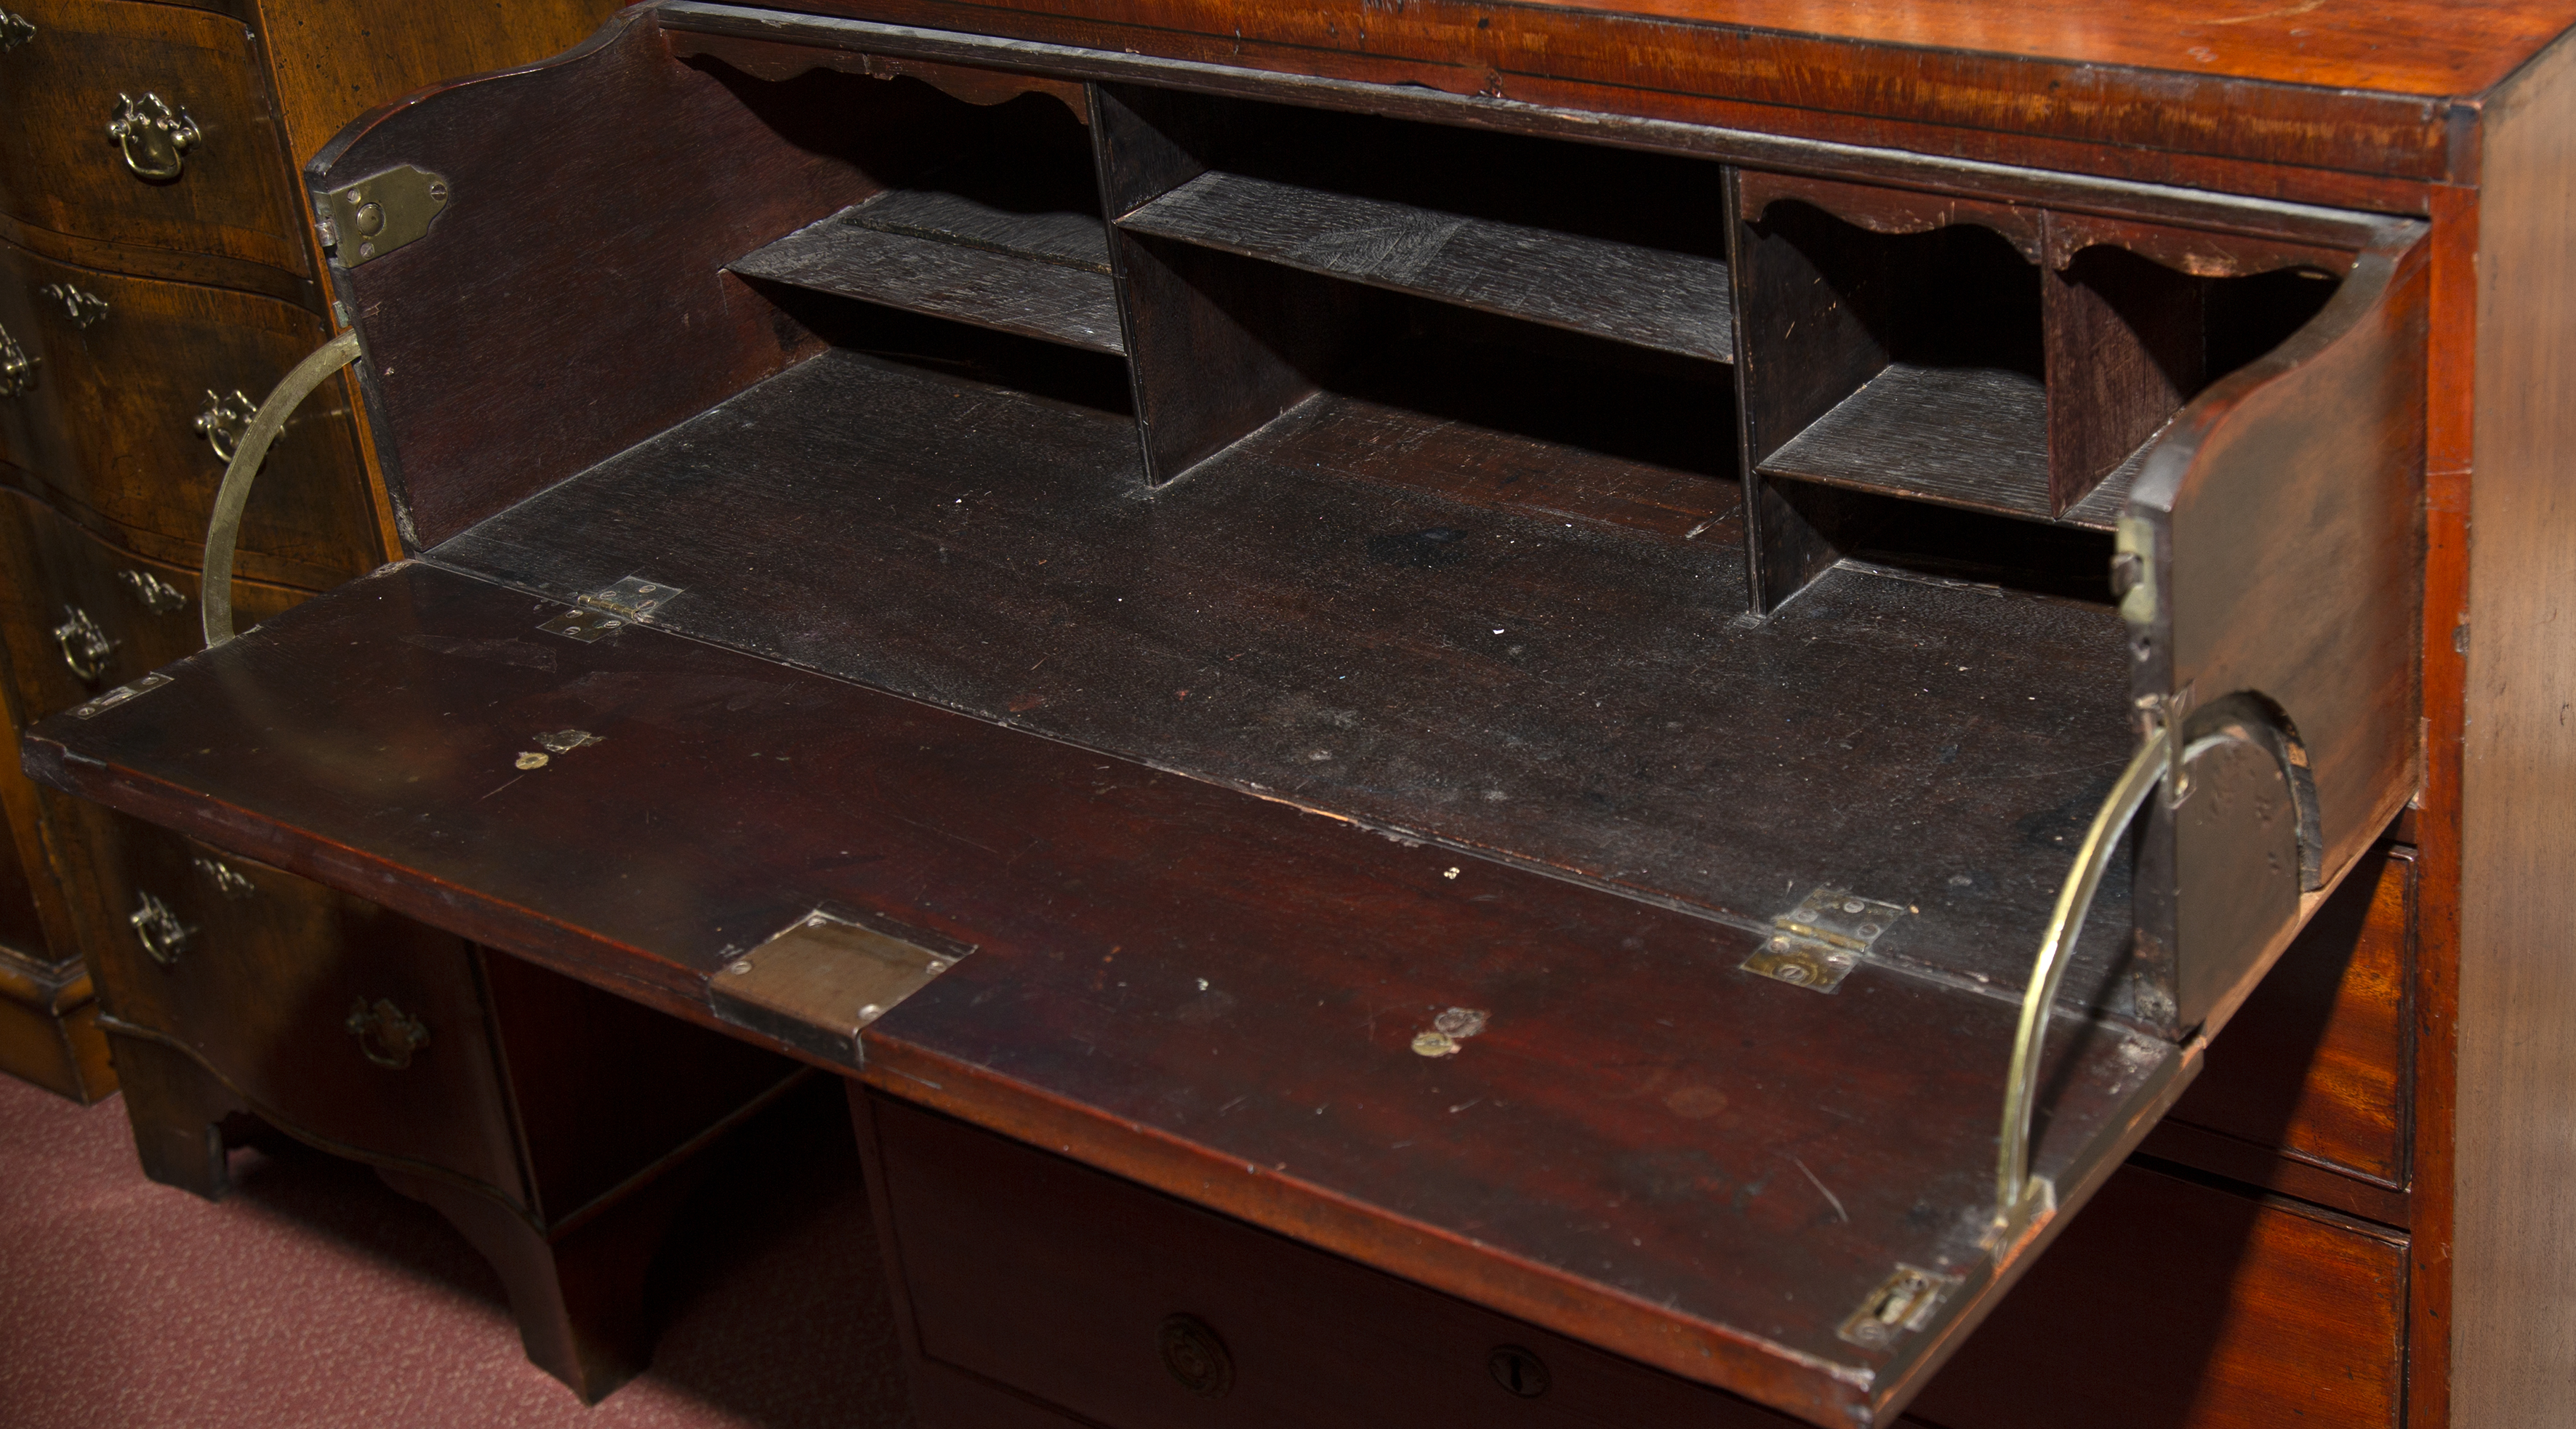 A George III mahogany secretaire chest, the secretaire drawer enclosing open shelving and above - Image 3 of 3